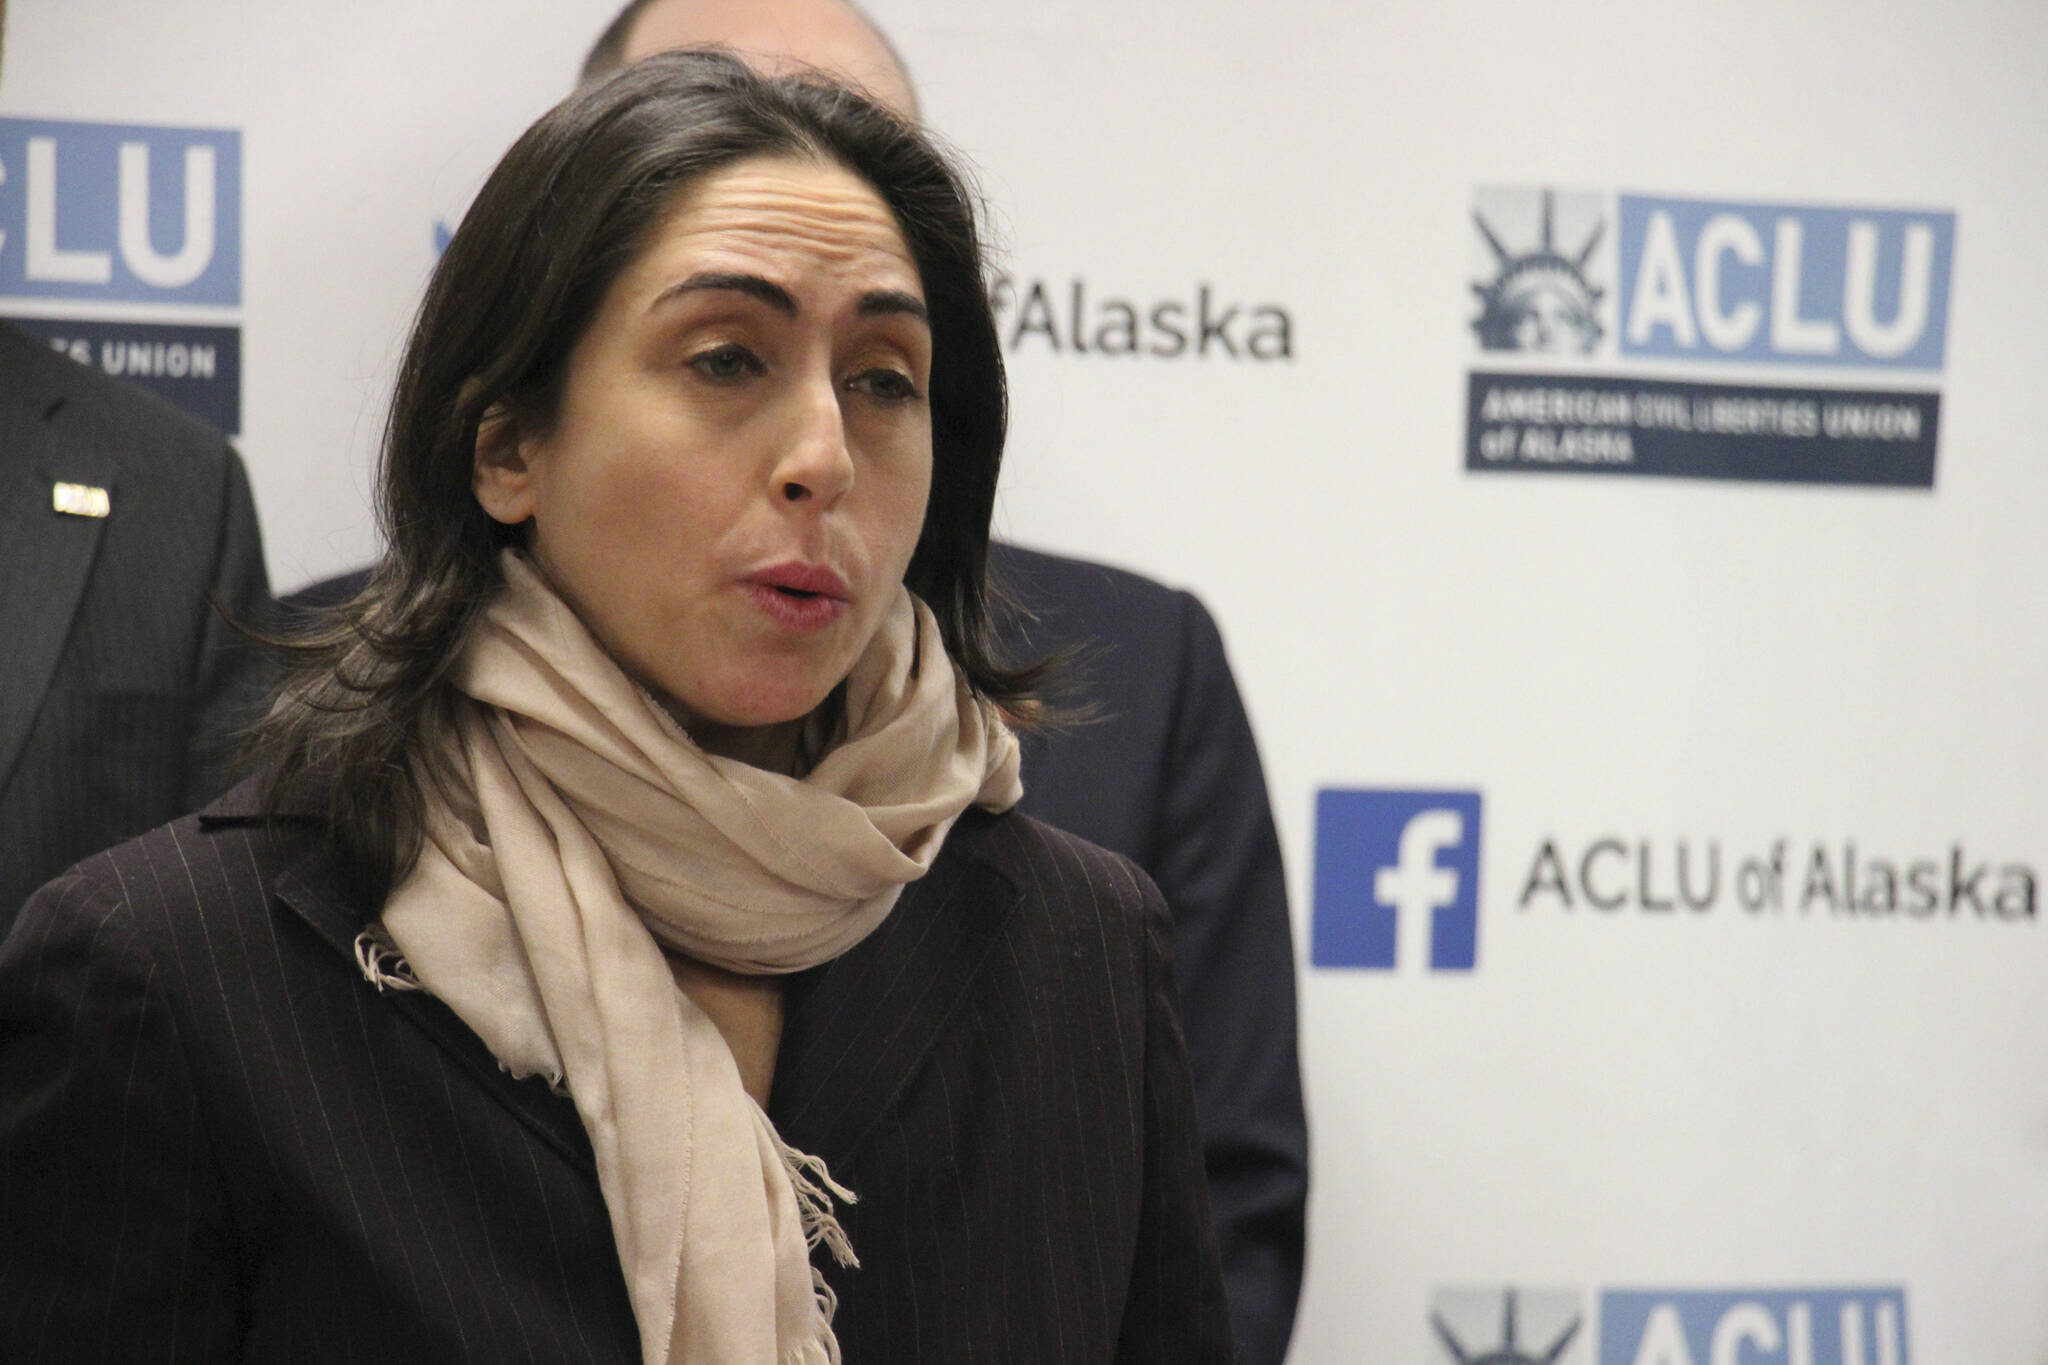 Former Alaska Assistant Attorney General Elizabeth Bakalar speaks a news conference on Jan. 10, 2019, in Anchorage, Alaska, after she sued the state. A federal judge on Thursday, Jan. 20, 2022, ruled that Bakalar was wrongfully terminated by the then-new administration of Alaska Gov. Mike Dunleavy for violating her freedom of speech rights. (AP File Photo / Mark Thiessen)